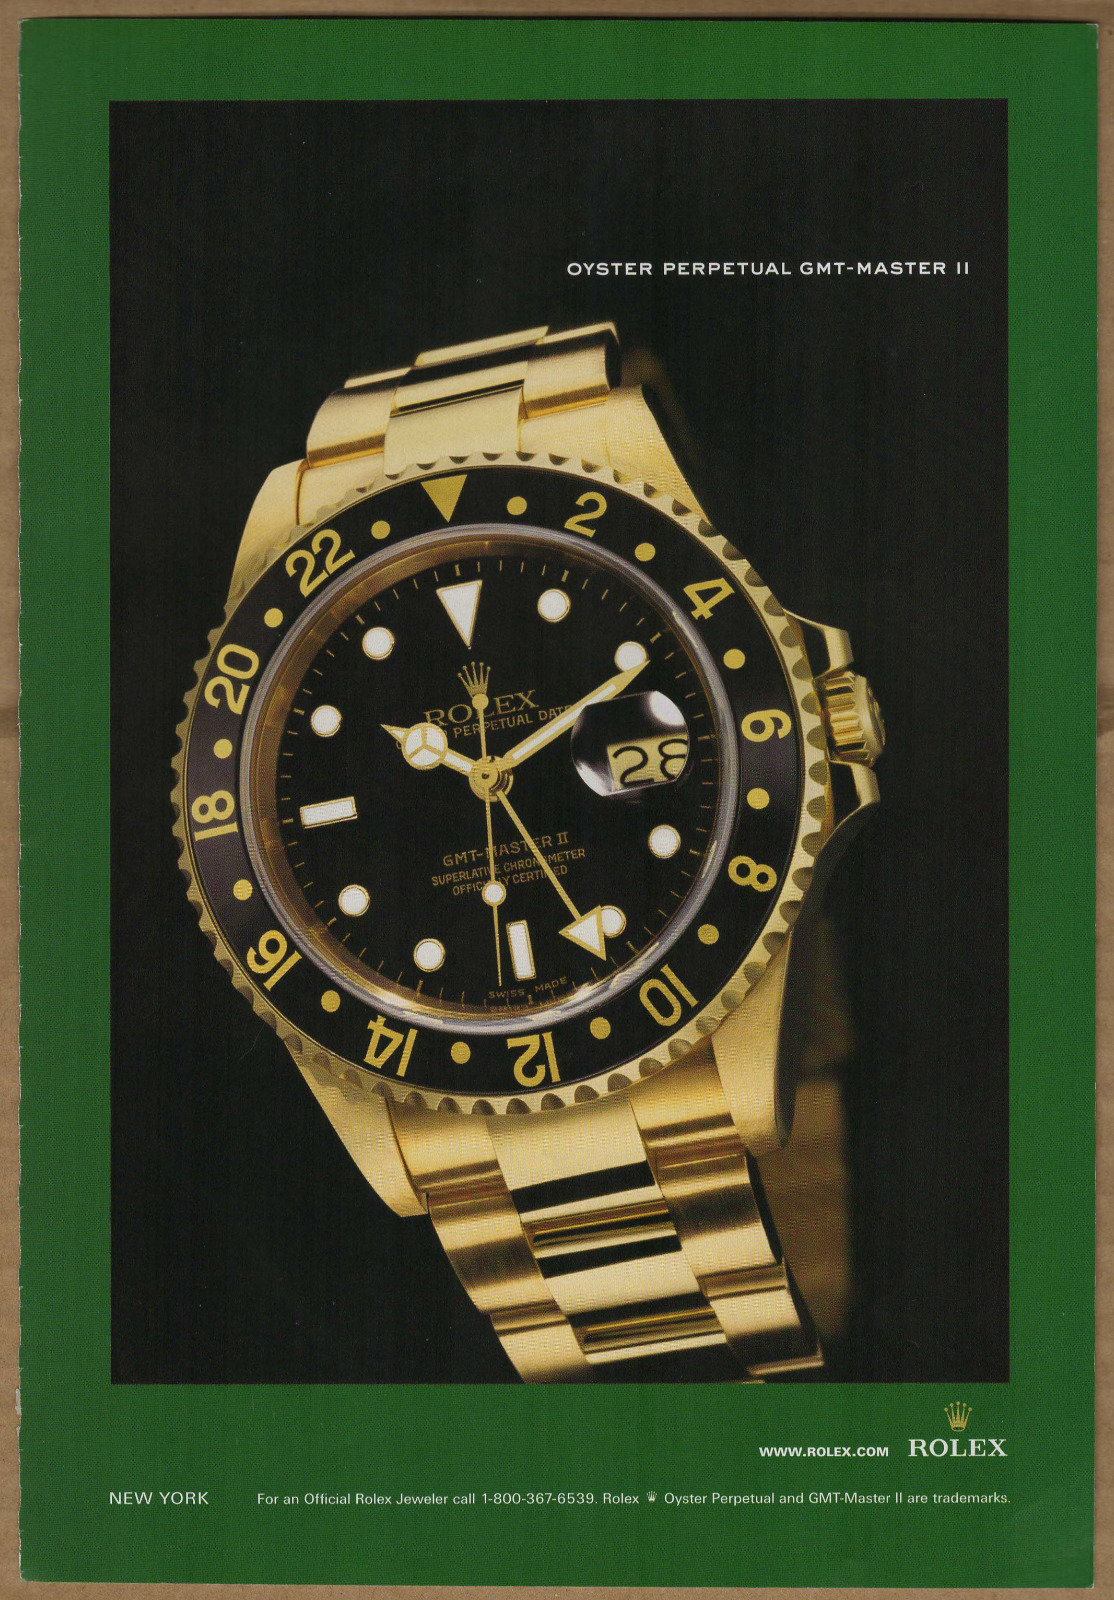 2005 Rolex GMT-Master II Watch Vintage Print Ad Oyster Perpetual Black and Gold